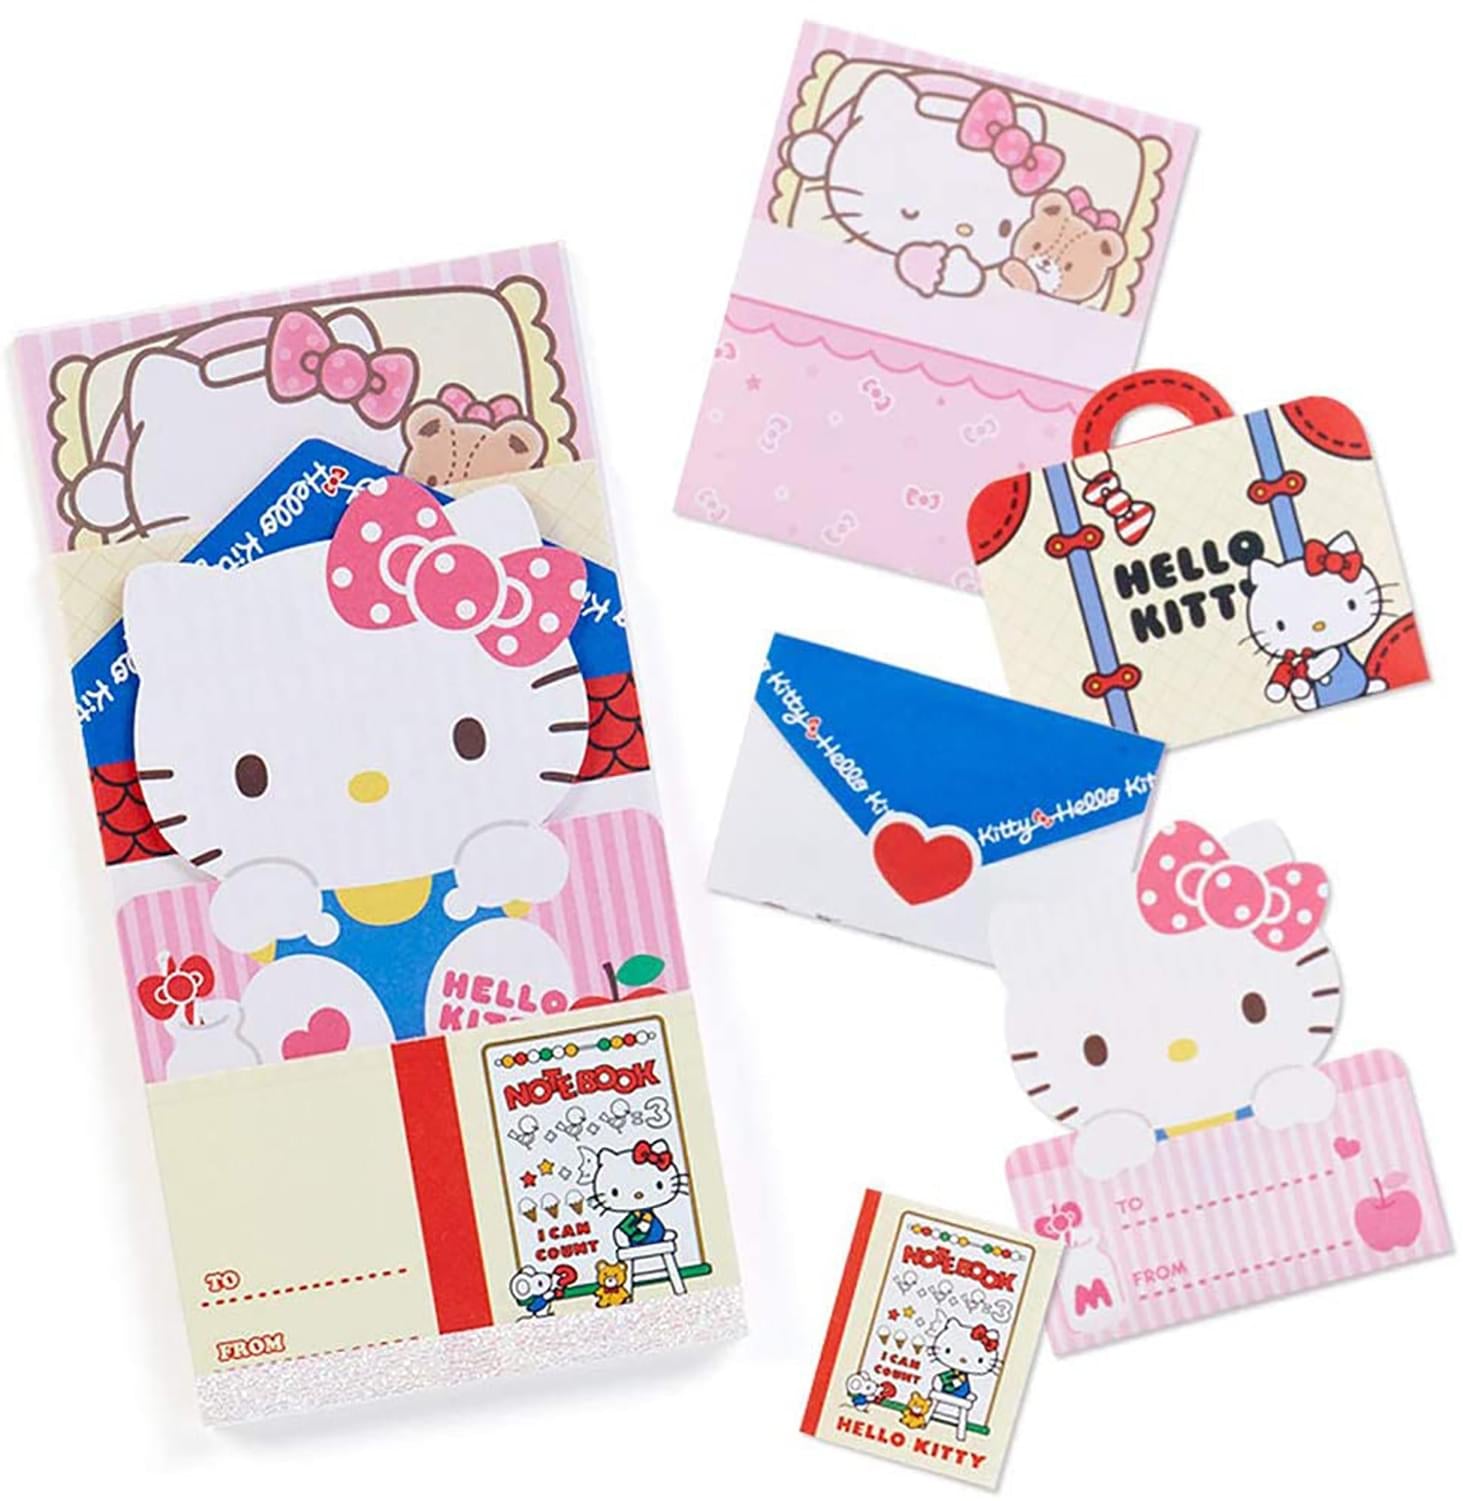 Hello Kitty Stationery Set | 5 Fun Designs | 75 Pieces Total